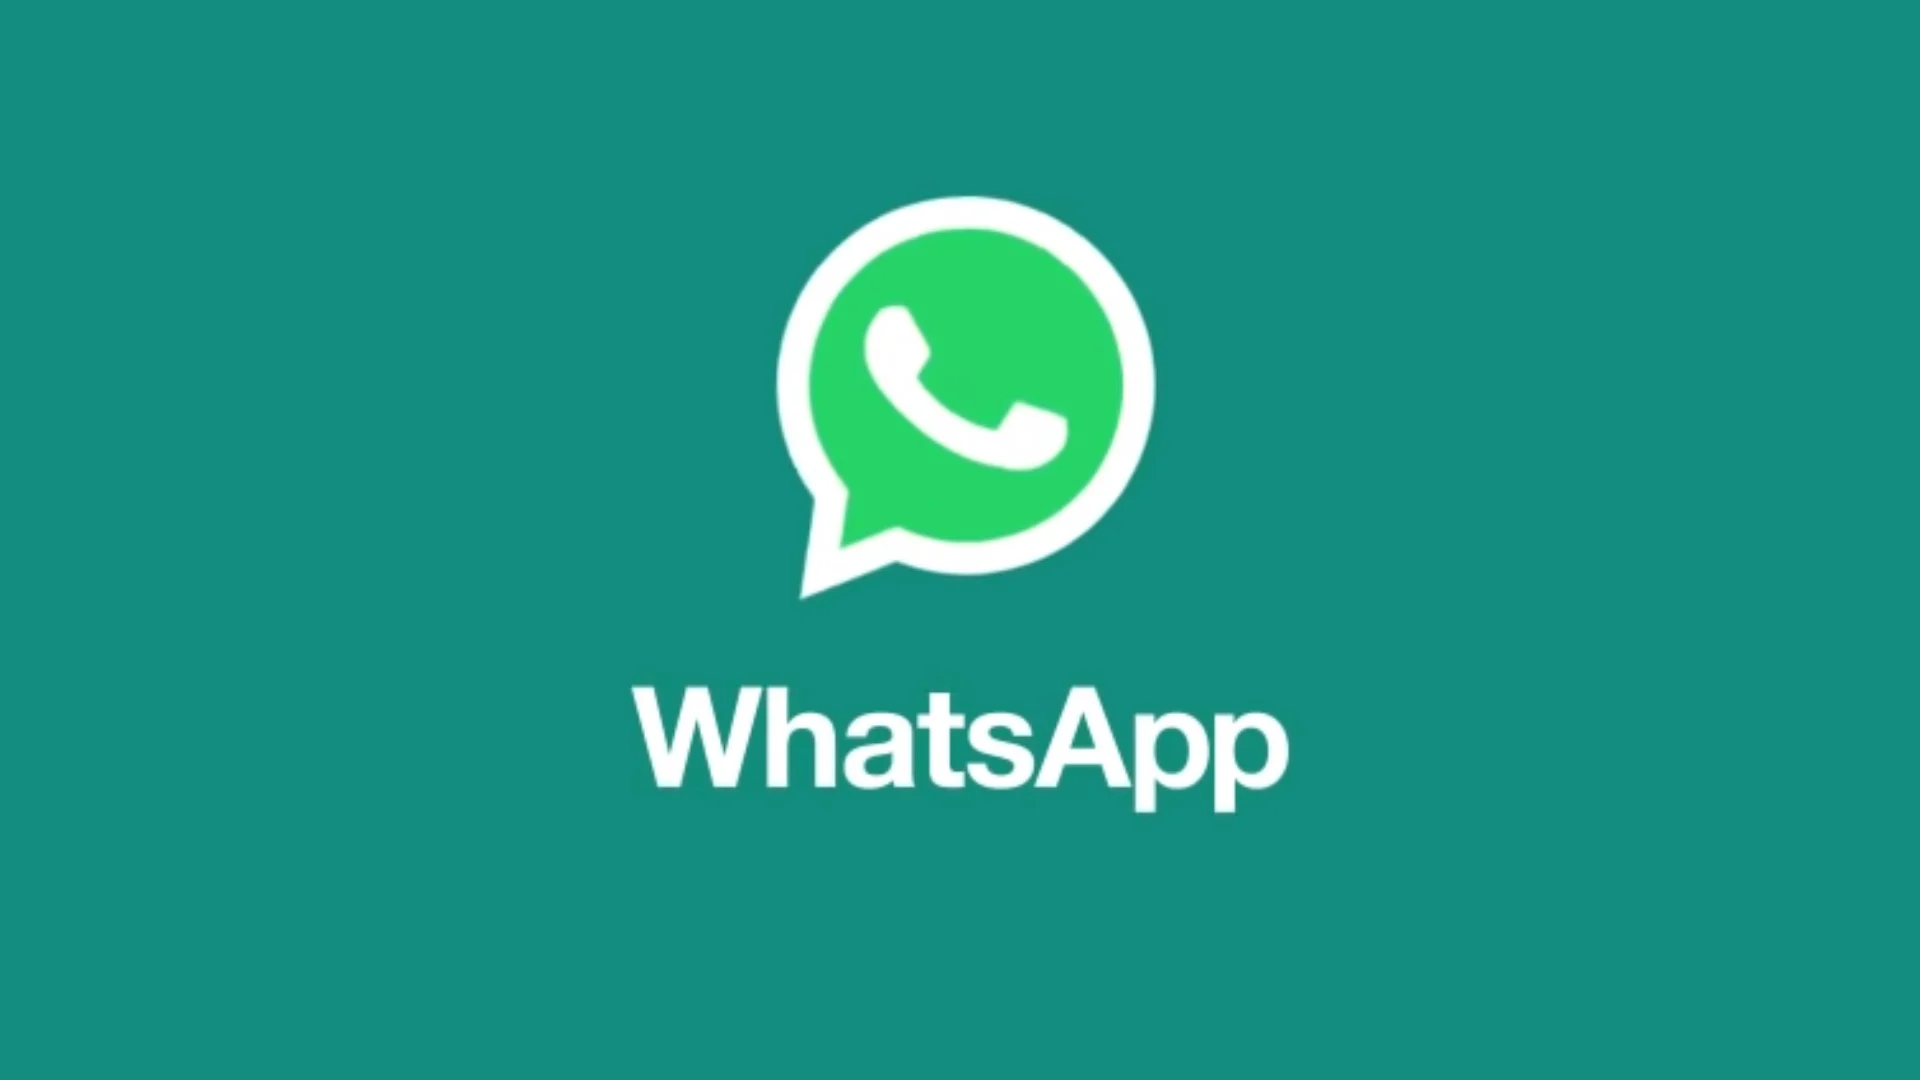 Strengthening Data Security: WhatsApp's New Password Reminder Feature